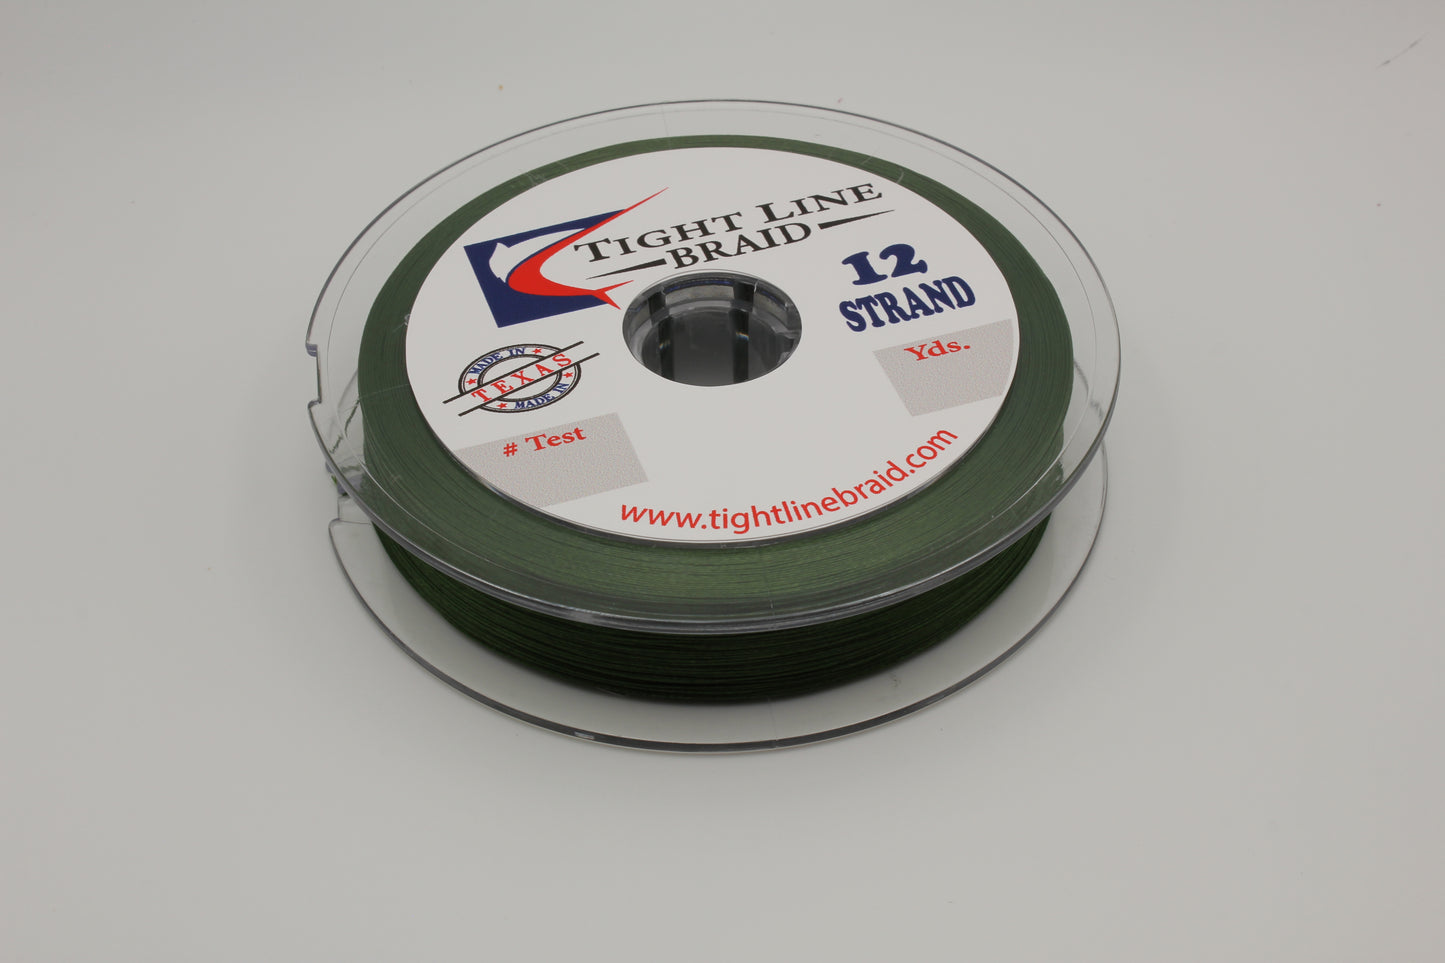 Military Green 12 Strand Hollow Core 65 lb / 300 Yards